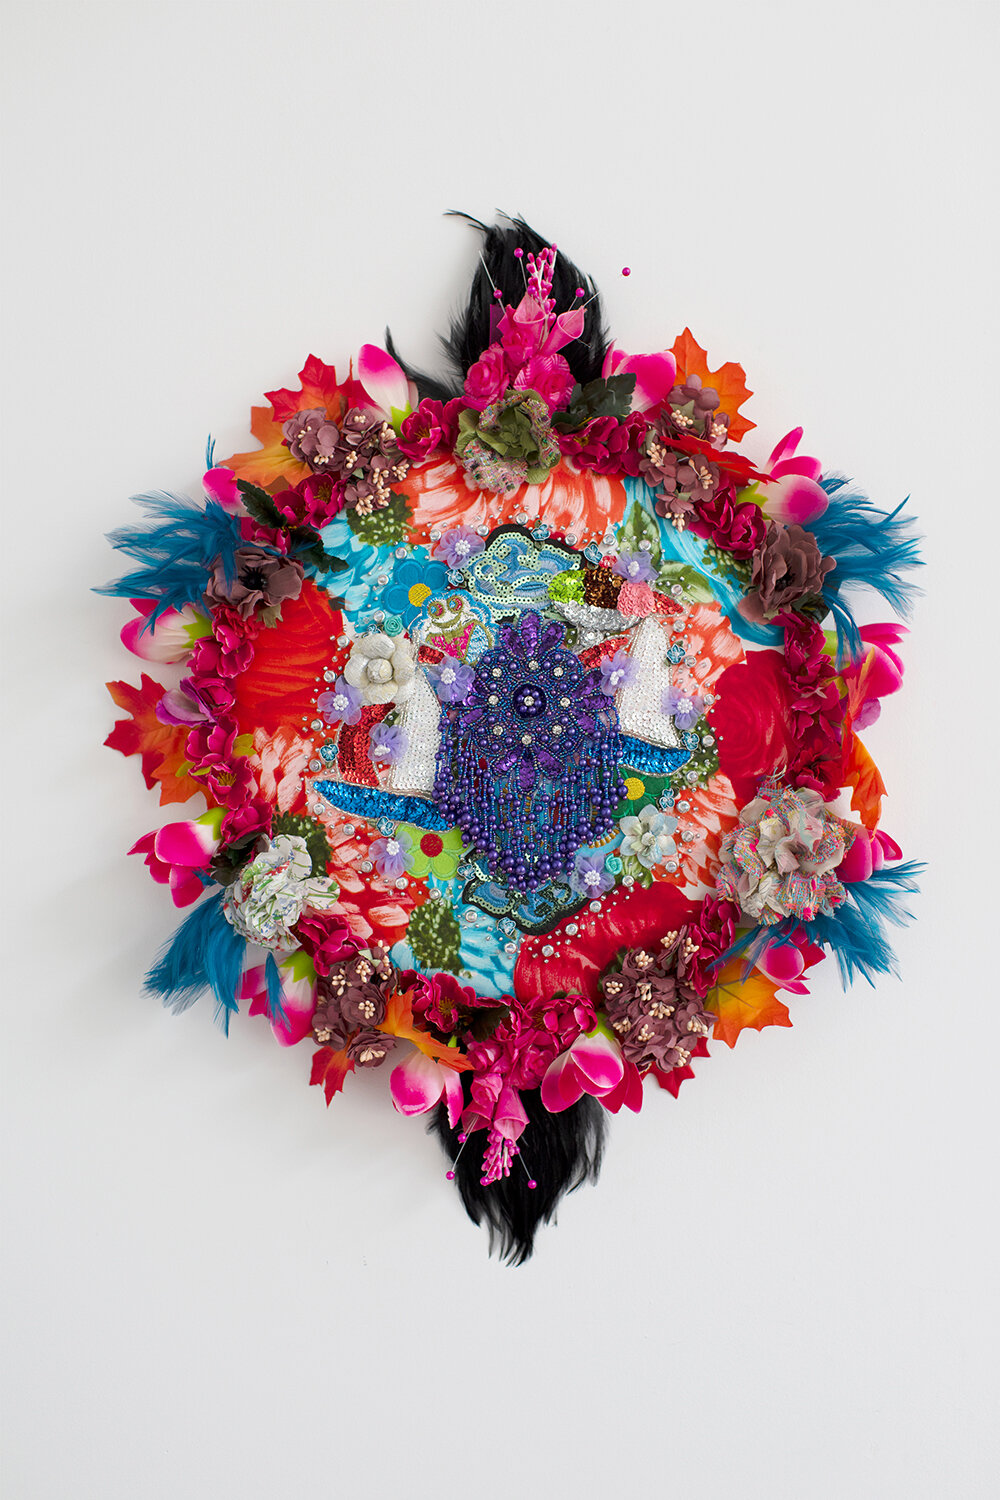   Elegy #12 , 2019, Crystal and plastic beads, sequin patches, found fabric, trim, fabric flowers, feathers, polyester batting, MDF, thread, 25 x 20 x 5” 